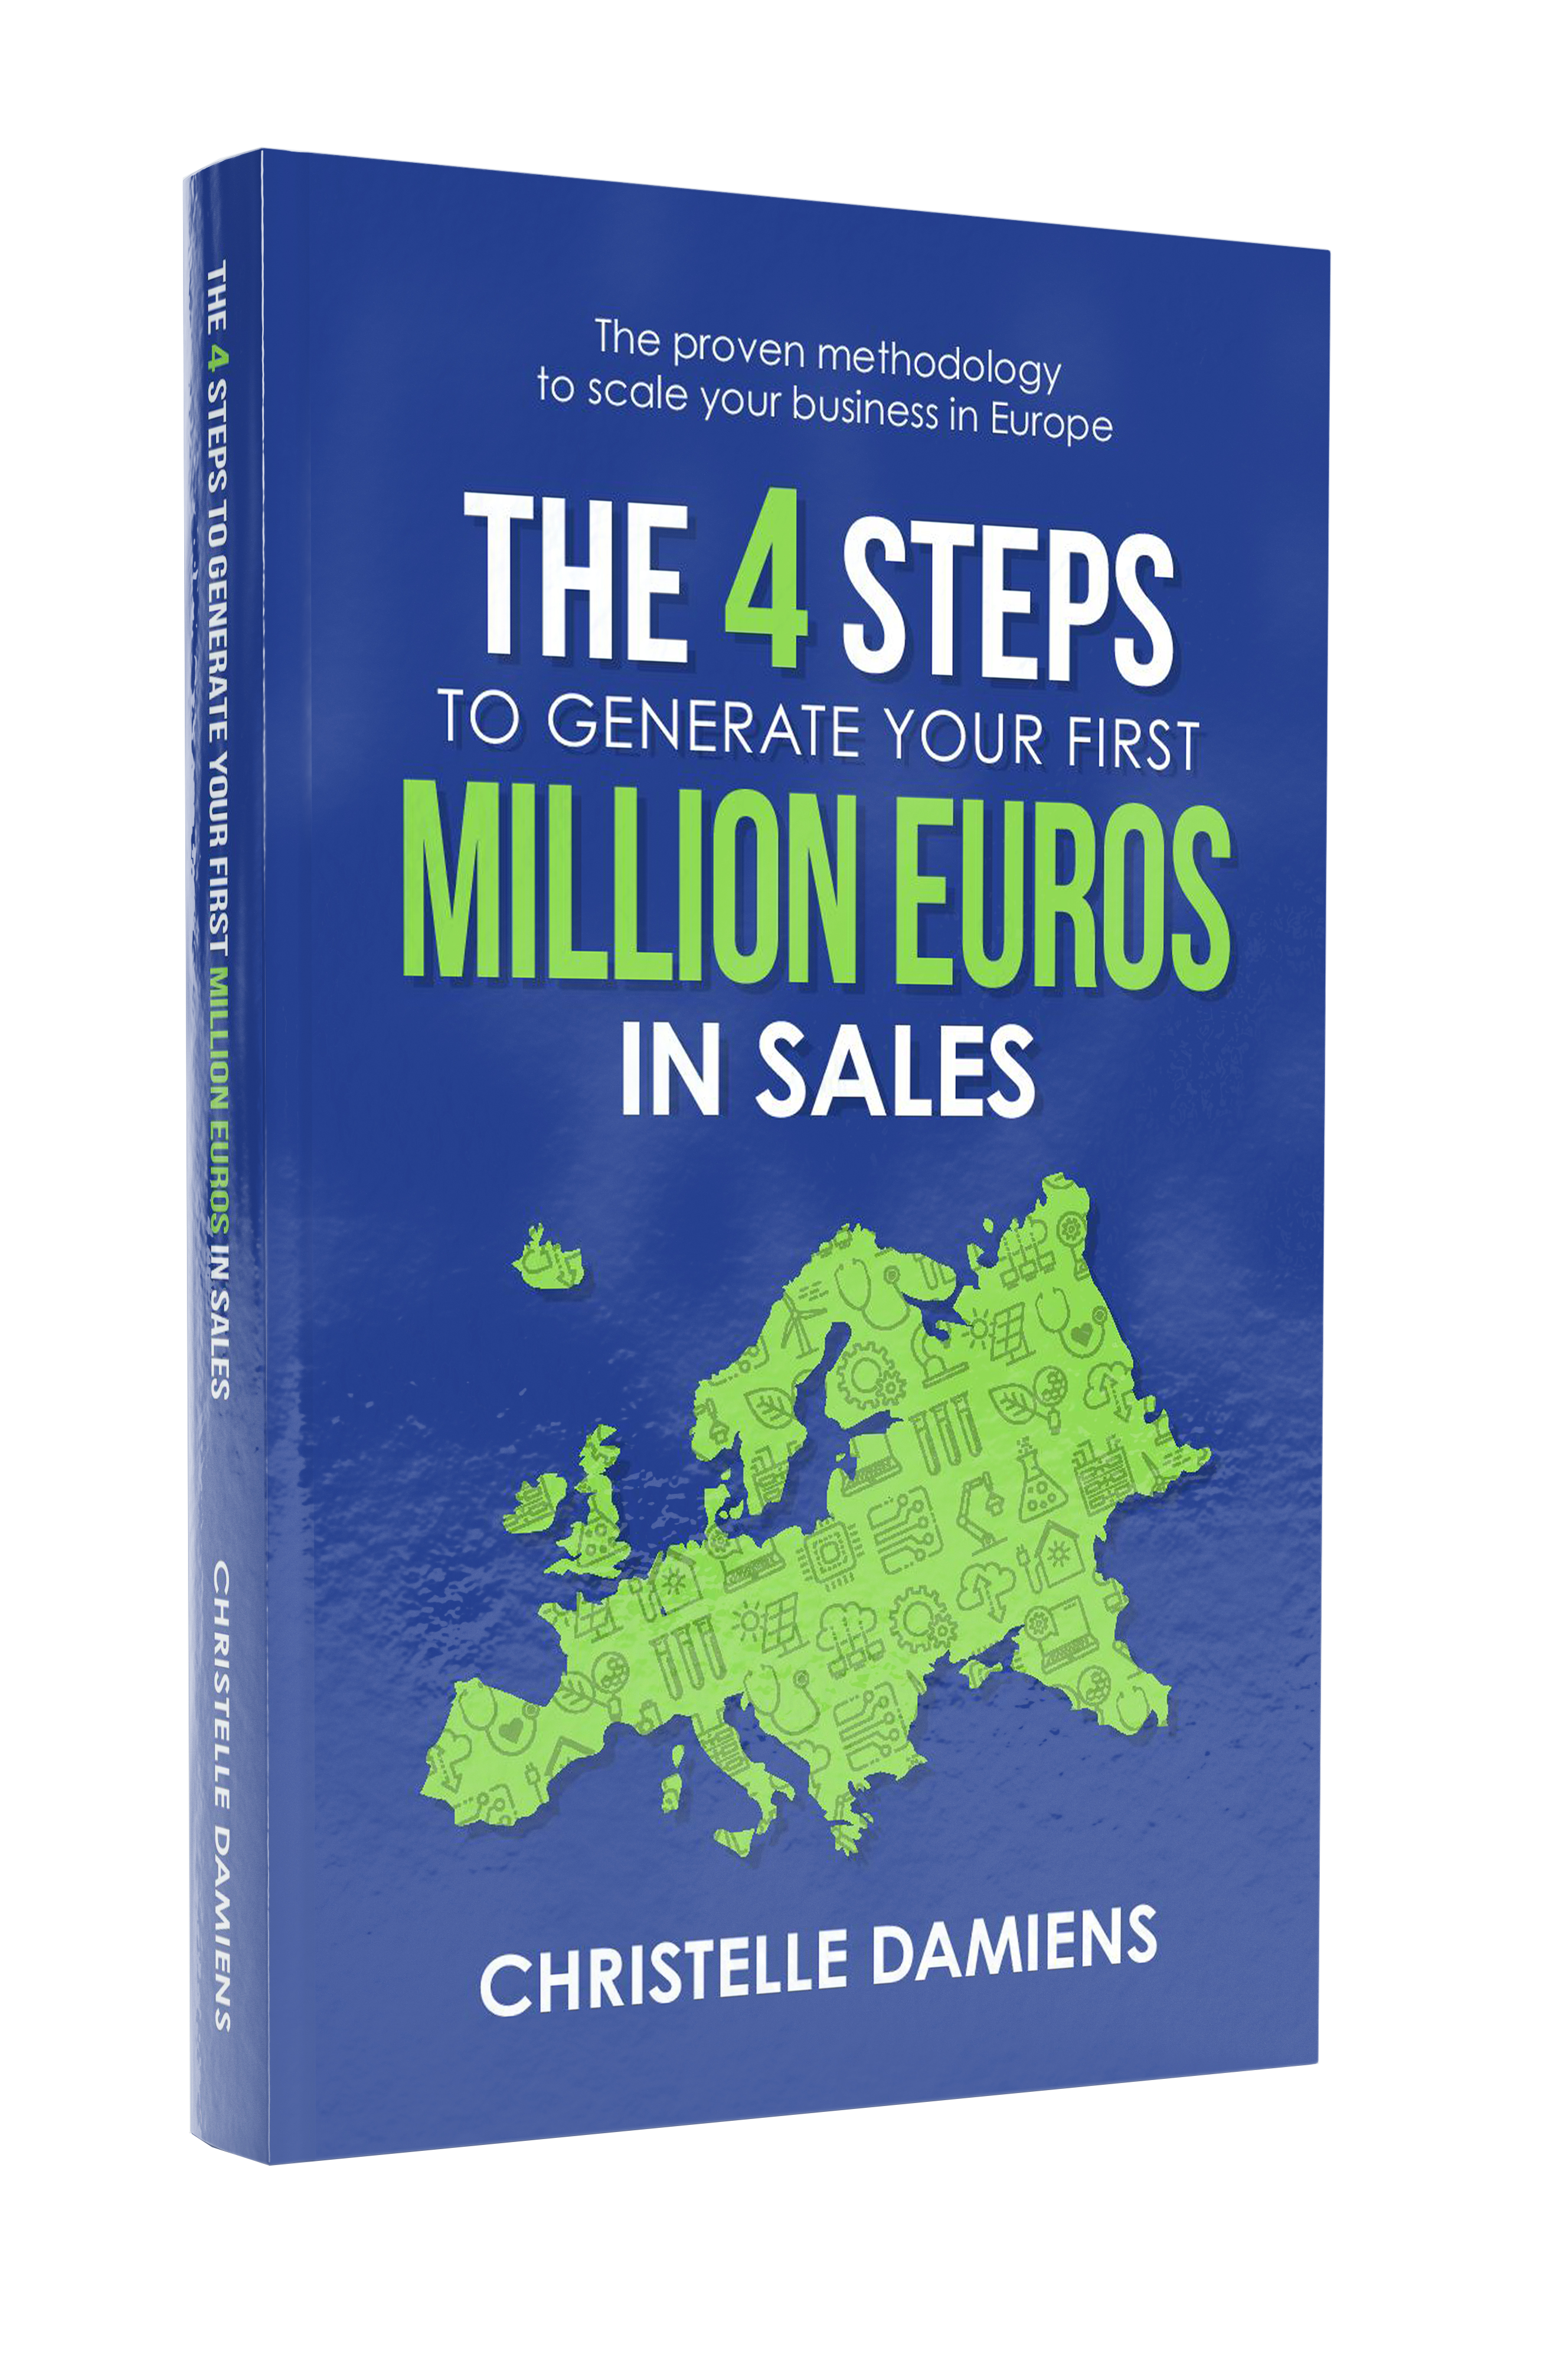 4 steps to generate your first million Euros book by Christelle Damiens Export Business in Europe